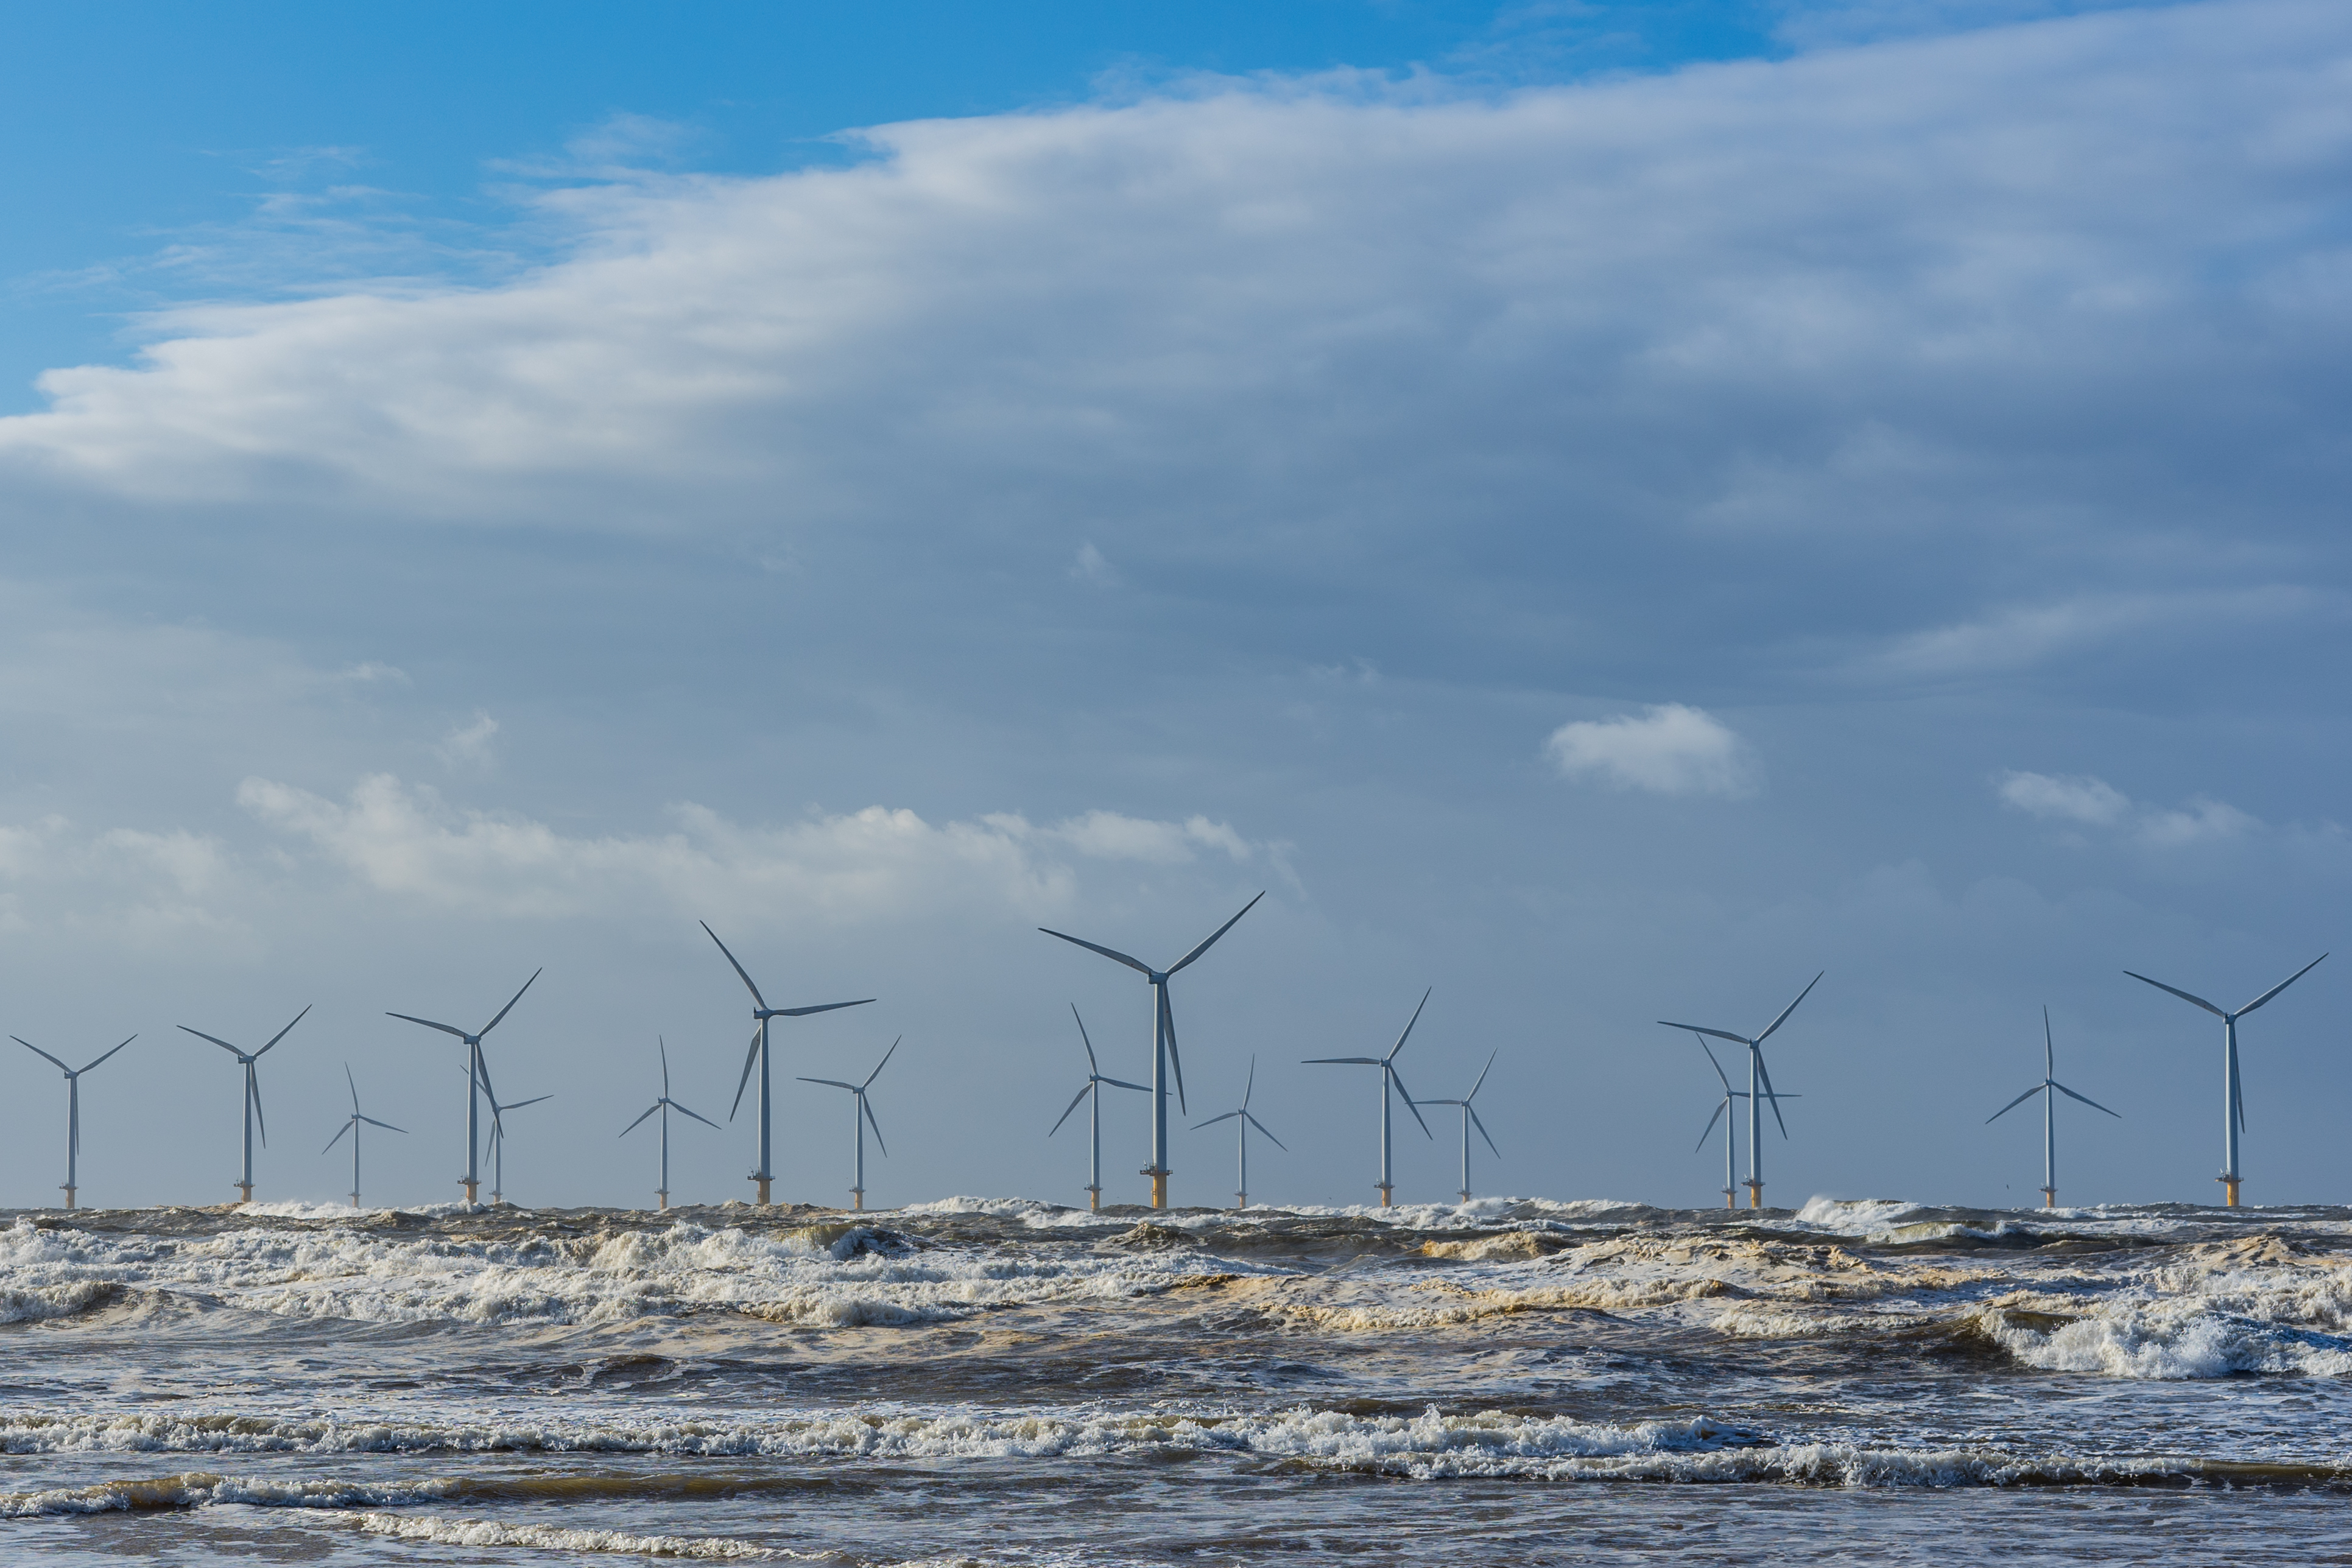 Find out more about energy and renewables in a coastal zone